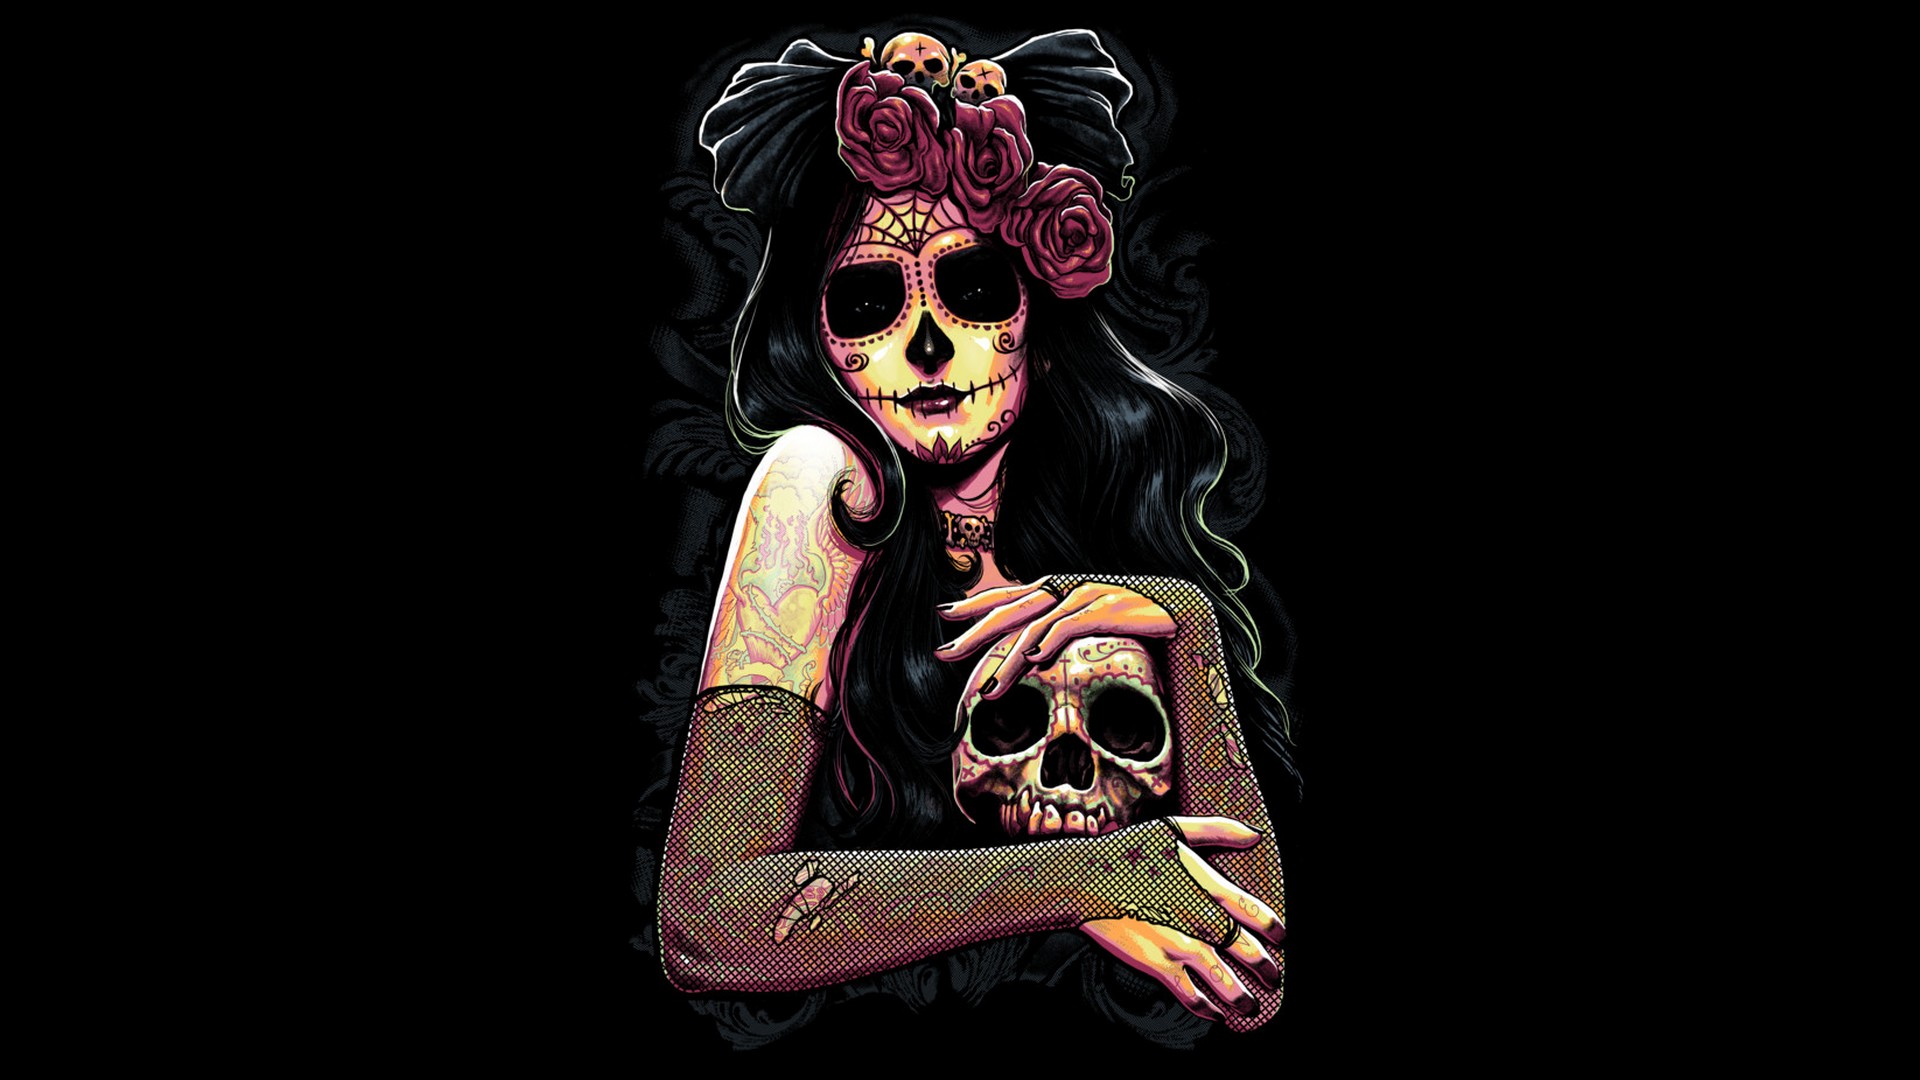 Woman Day Of The Dead Gothic Rose Sugar Skull 1920x1080